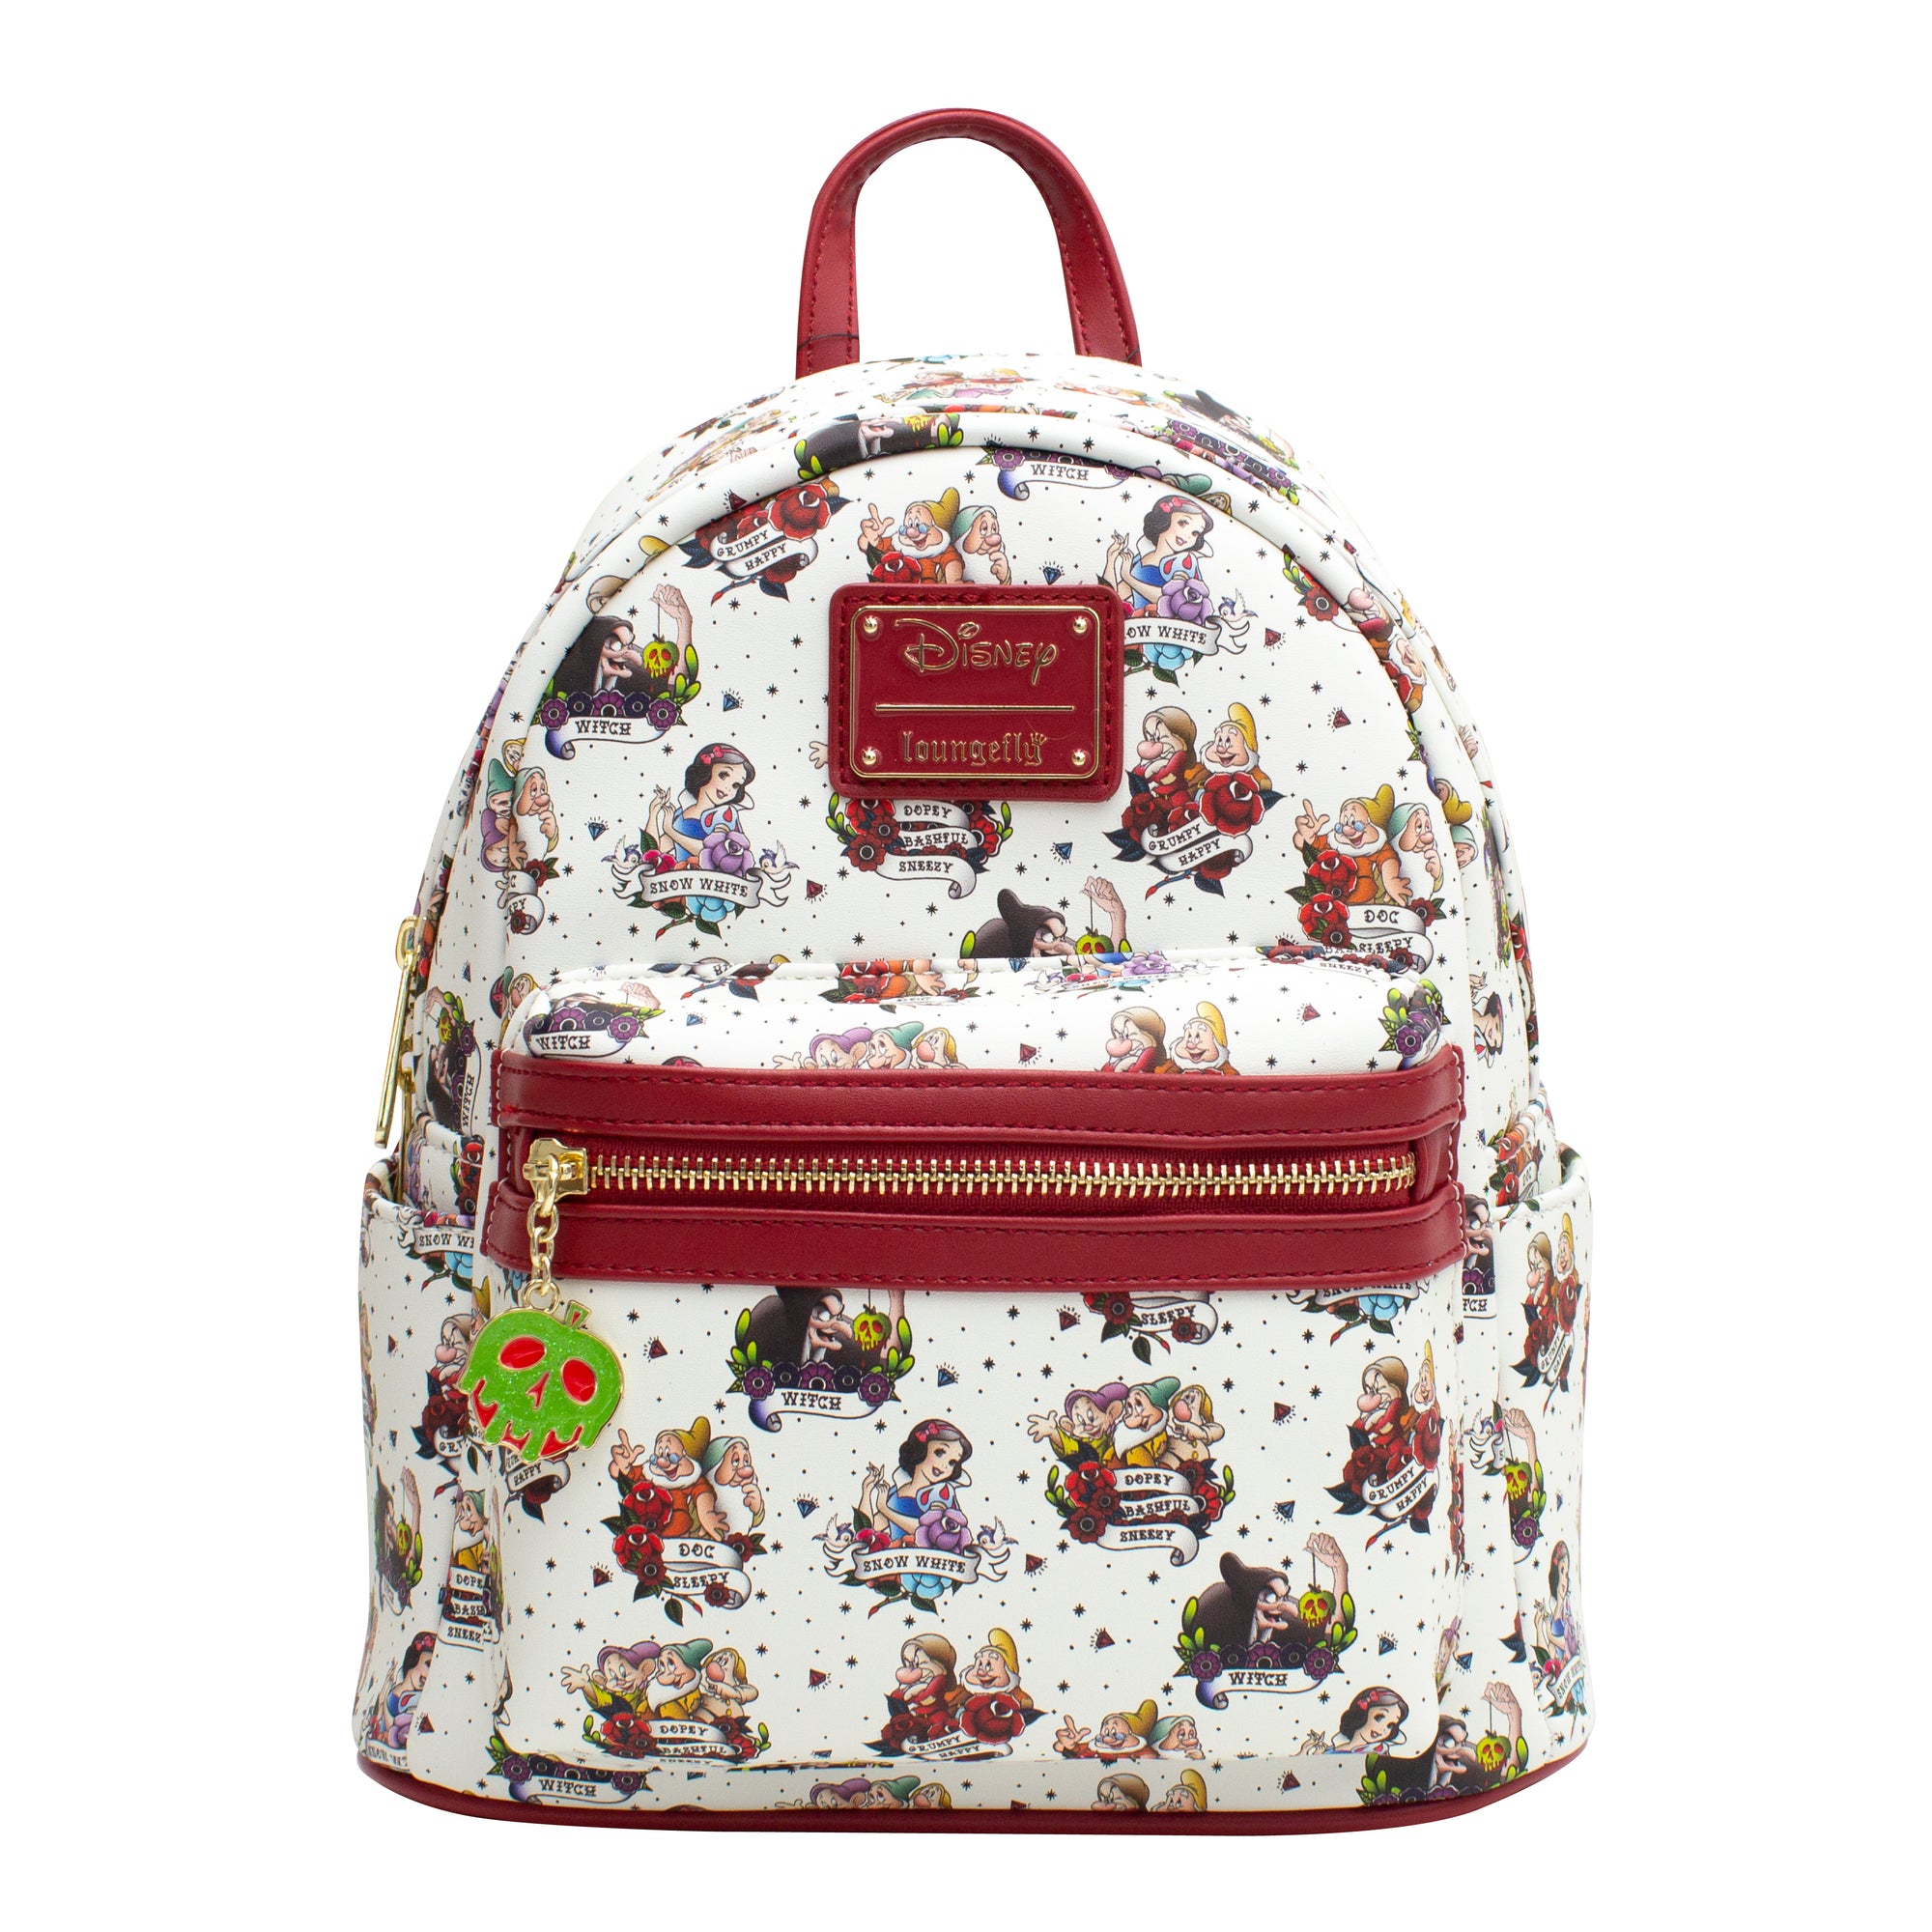 Buy Snow White Evil Queen Throne Crossbody Bag at Loungefly.